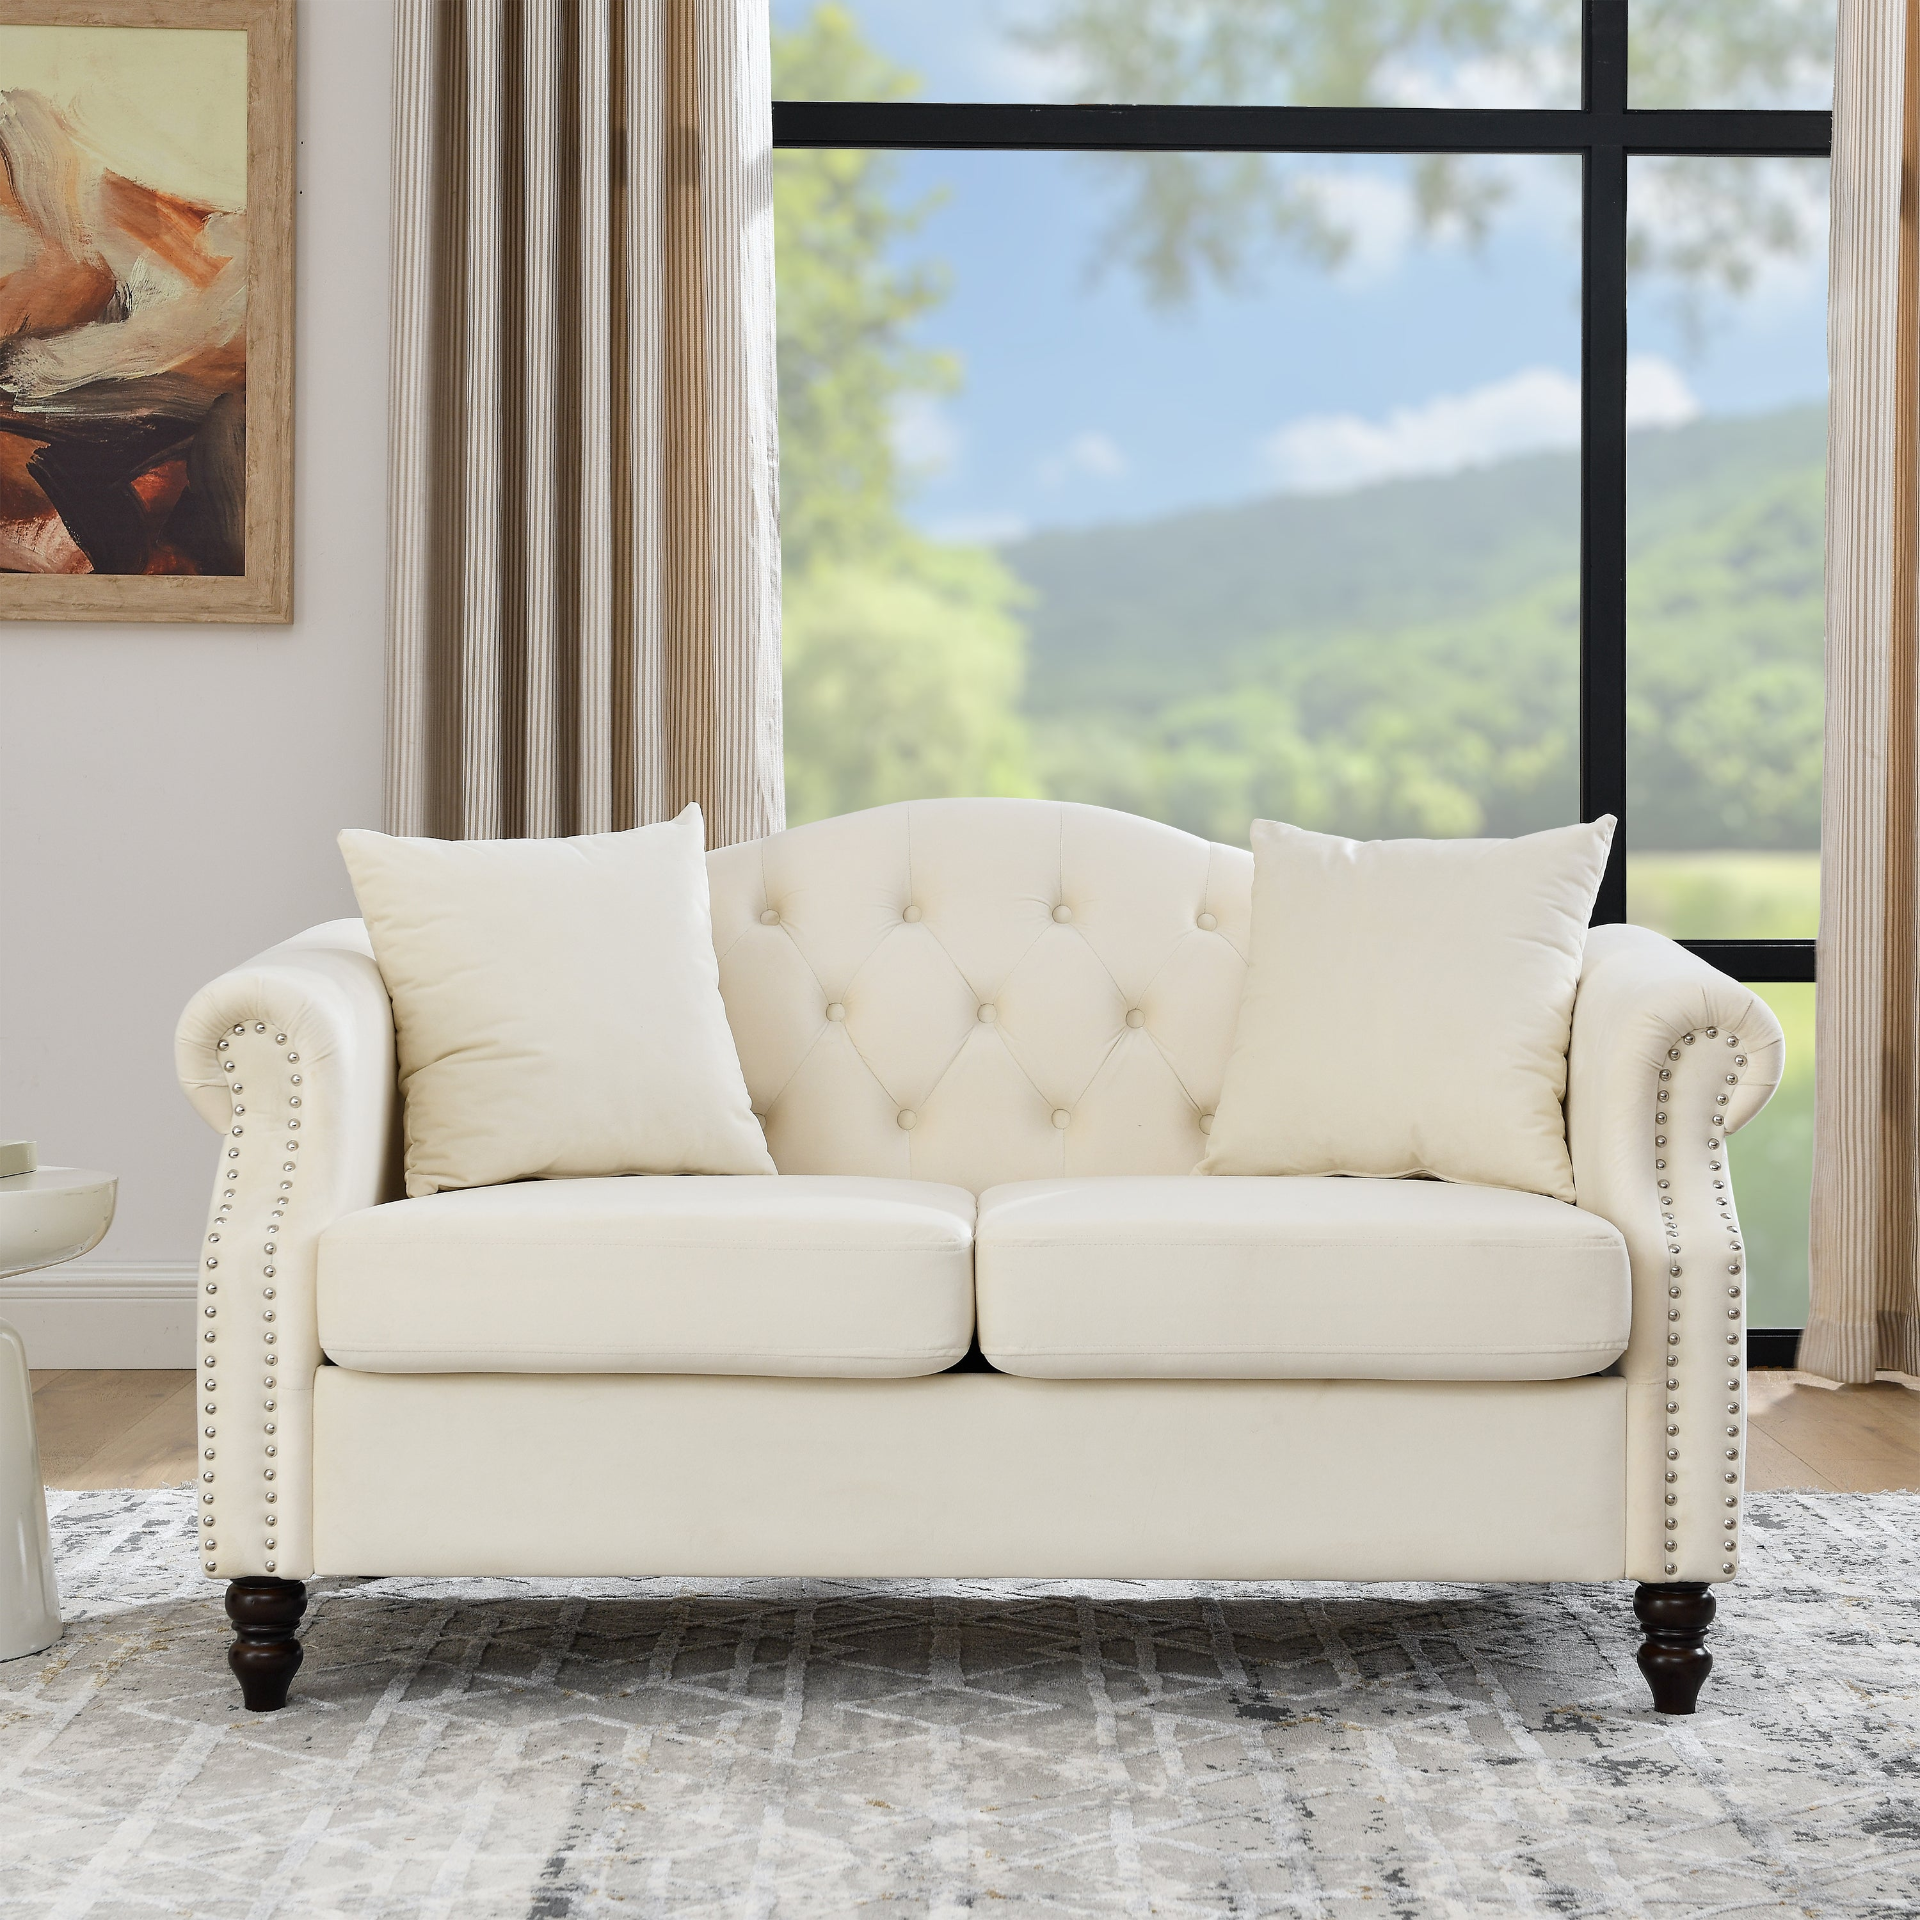 Beige - Timeless 2-Seater Chesterfield Sofa With (2) Decorative Pillows